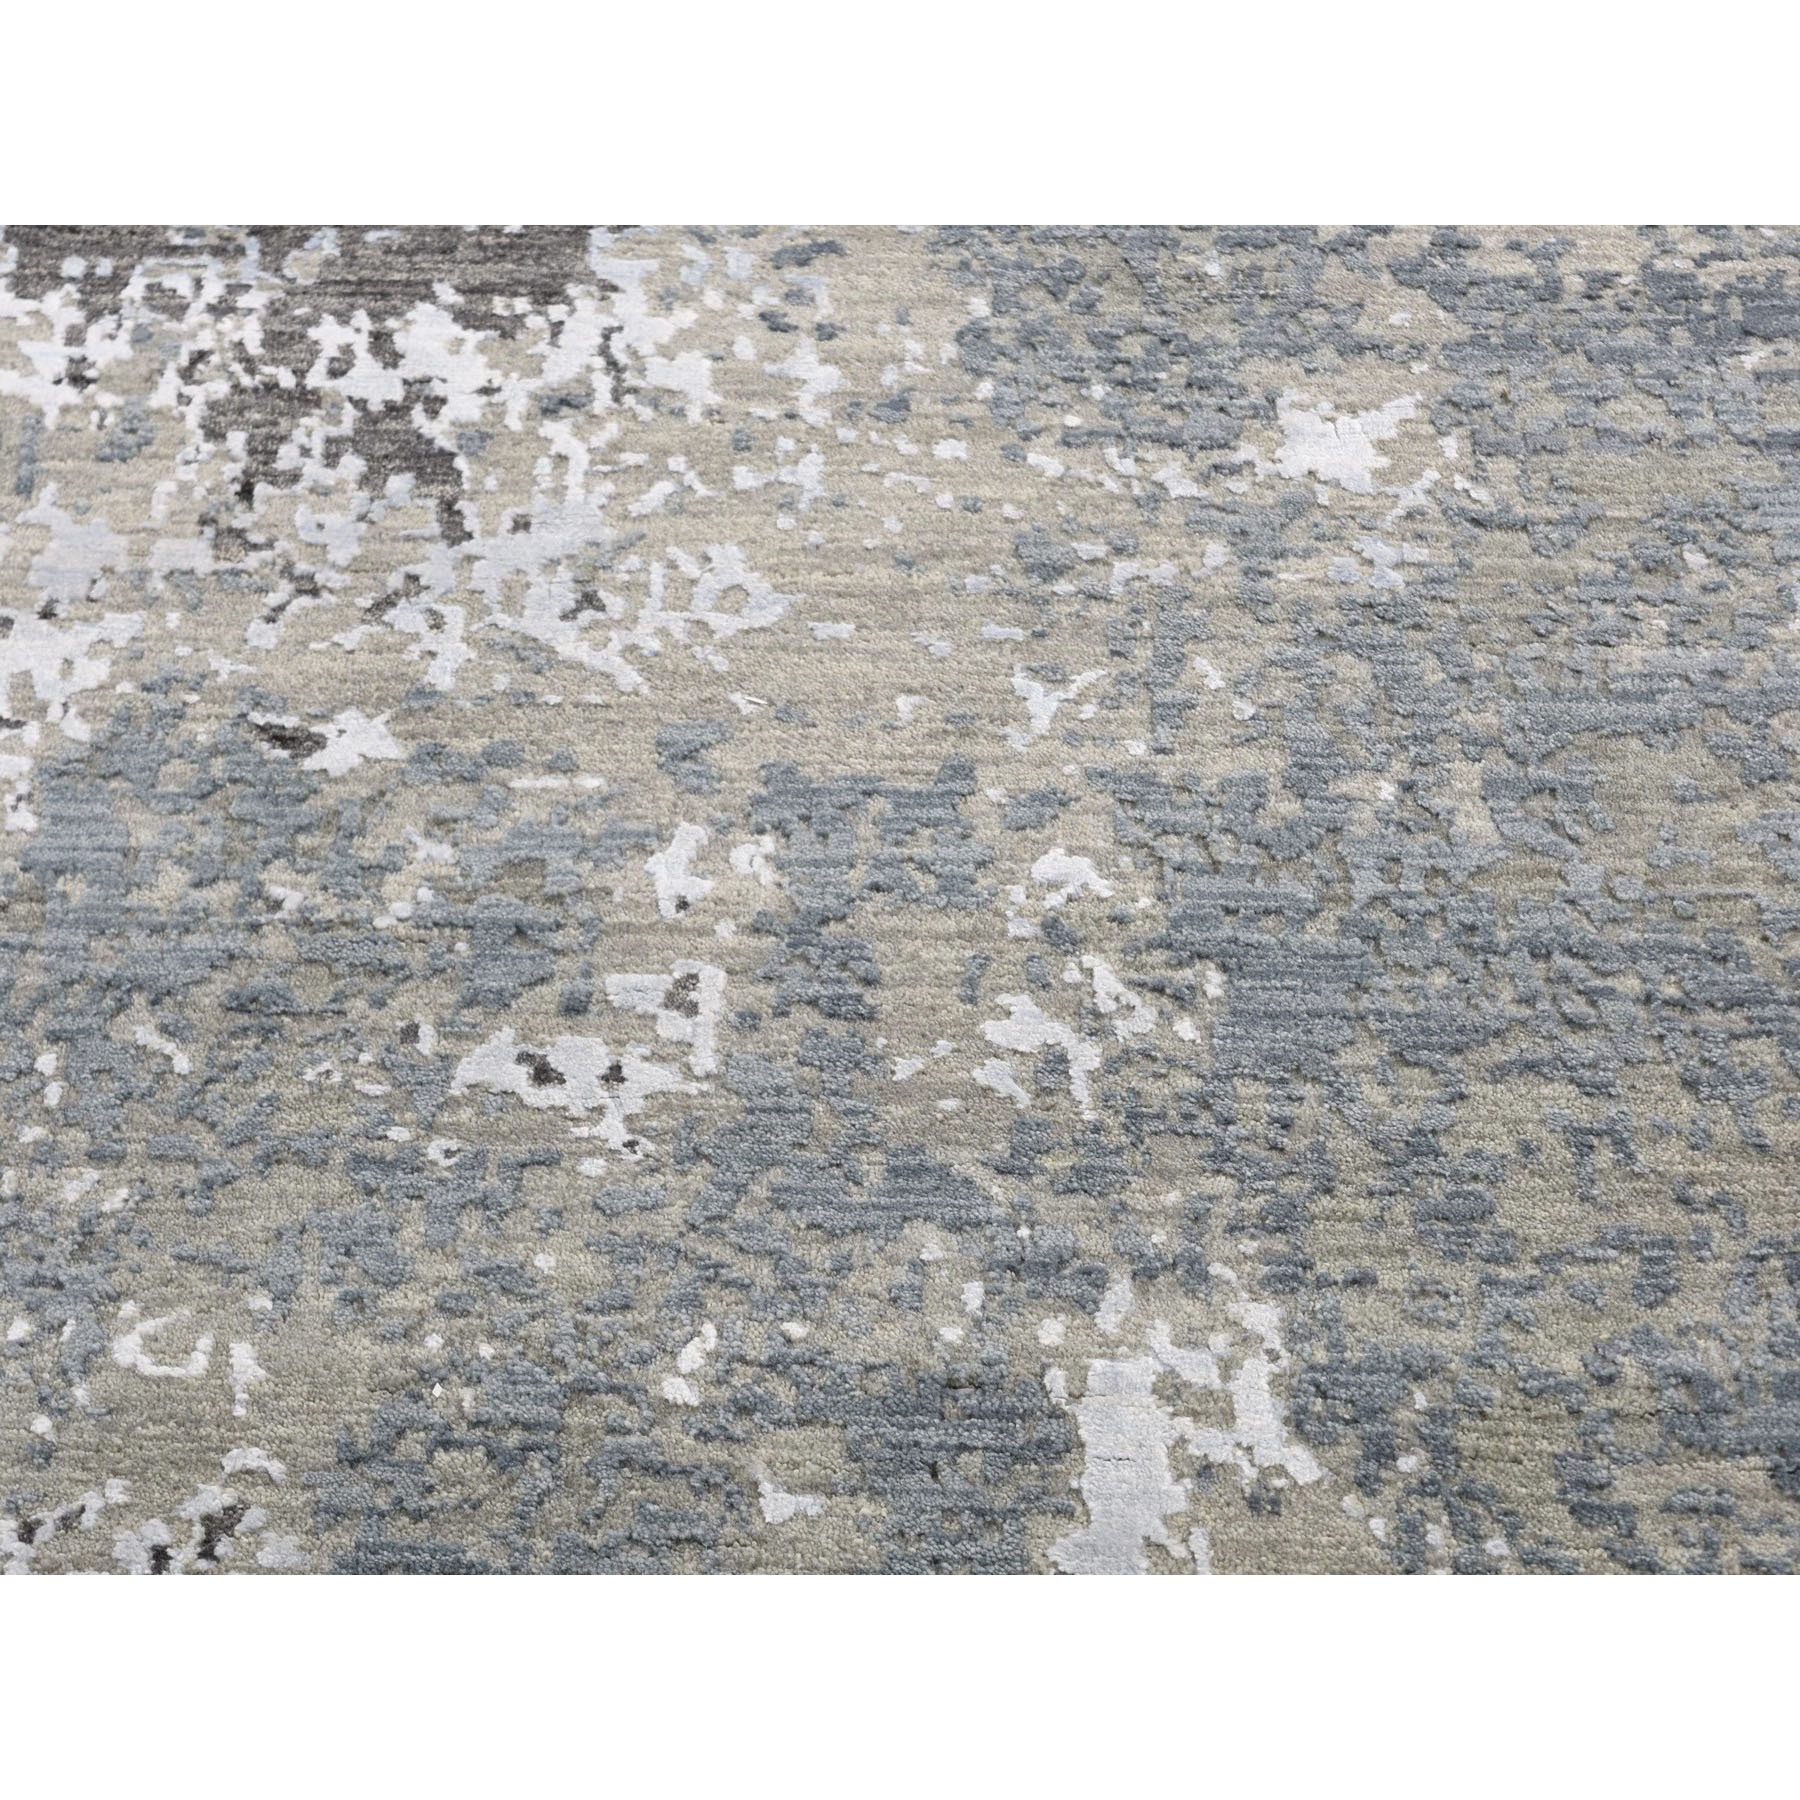 9-x12-1  Gray Hi-Low Pile Abstract Design Wool And Silk Hand Knotted Oriental Rug 